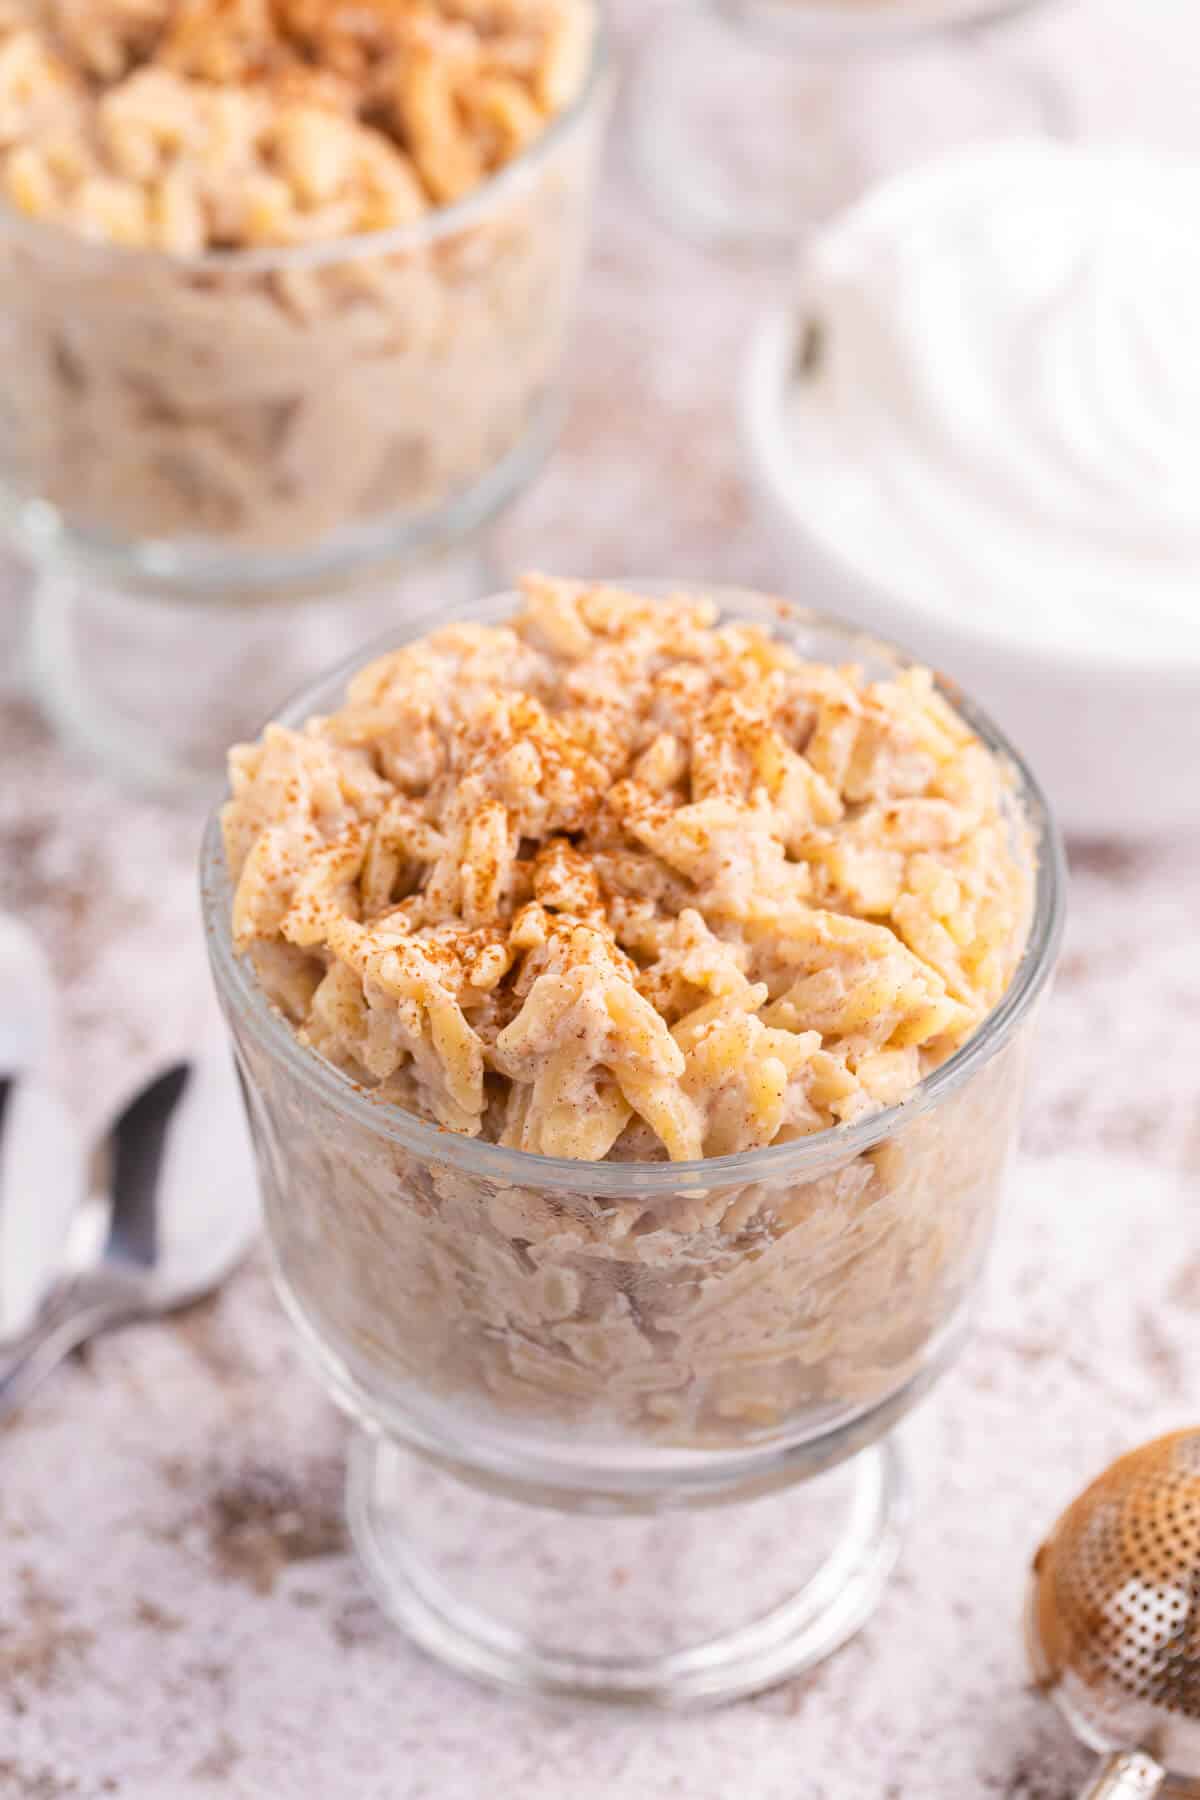 Orzo pudding in a parfait dish.